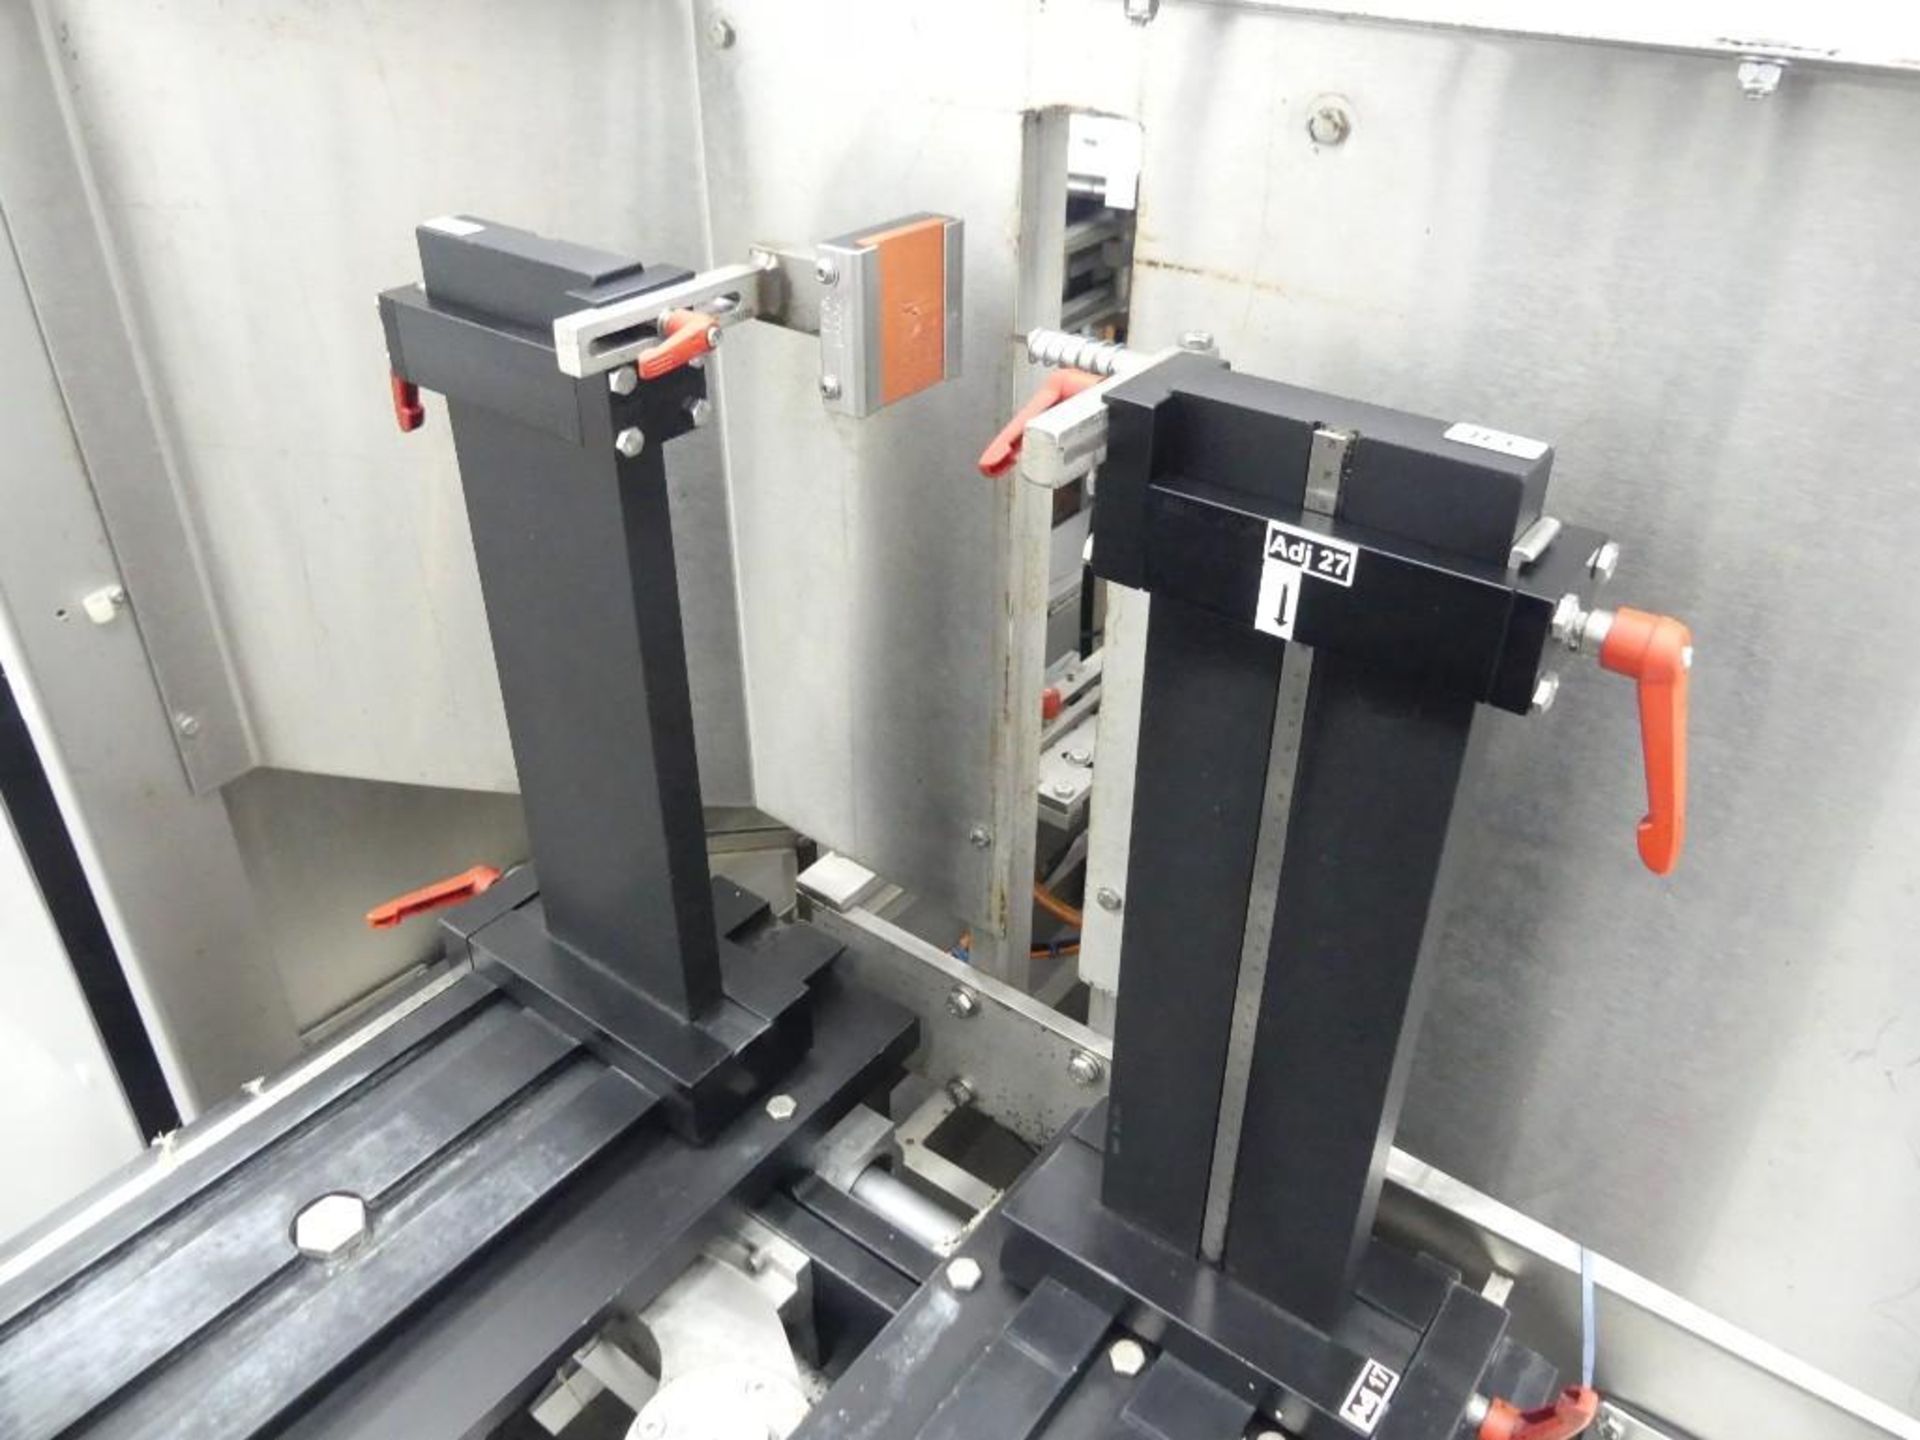 Massman HFFS-IM1000 Flexible Pouch Packaging System - Image 22 of 127